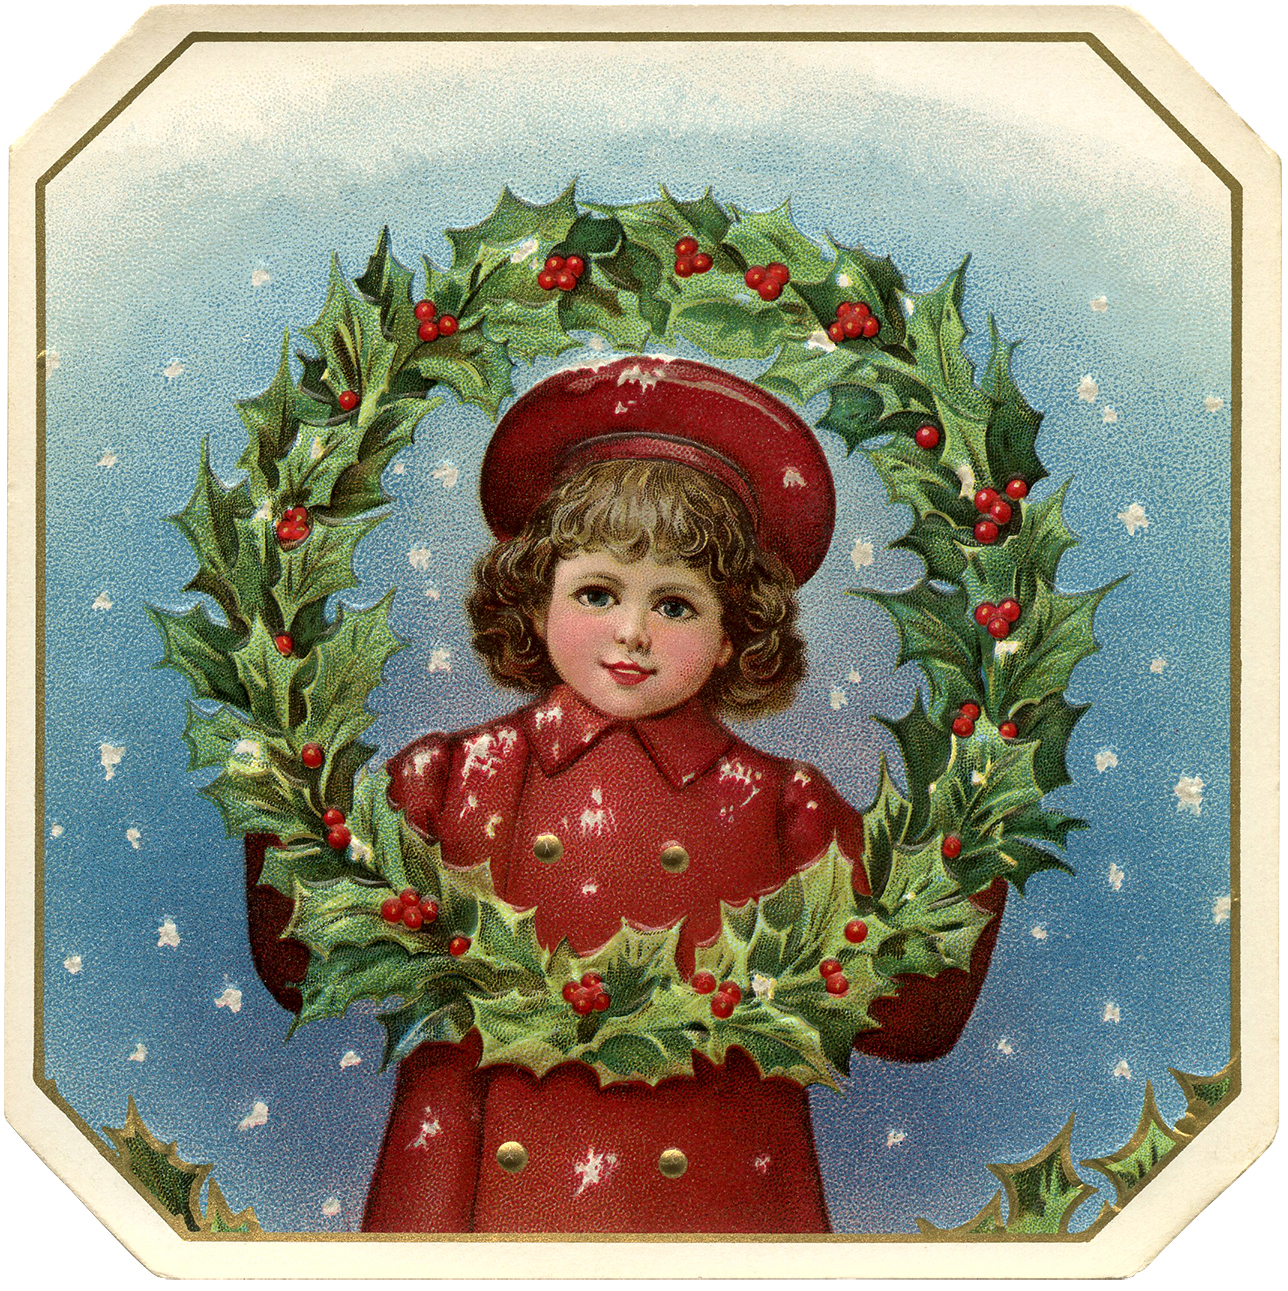 Victorian Christmas Clip Art   Girl With Wreath   The Graphics Fairy